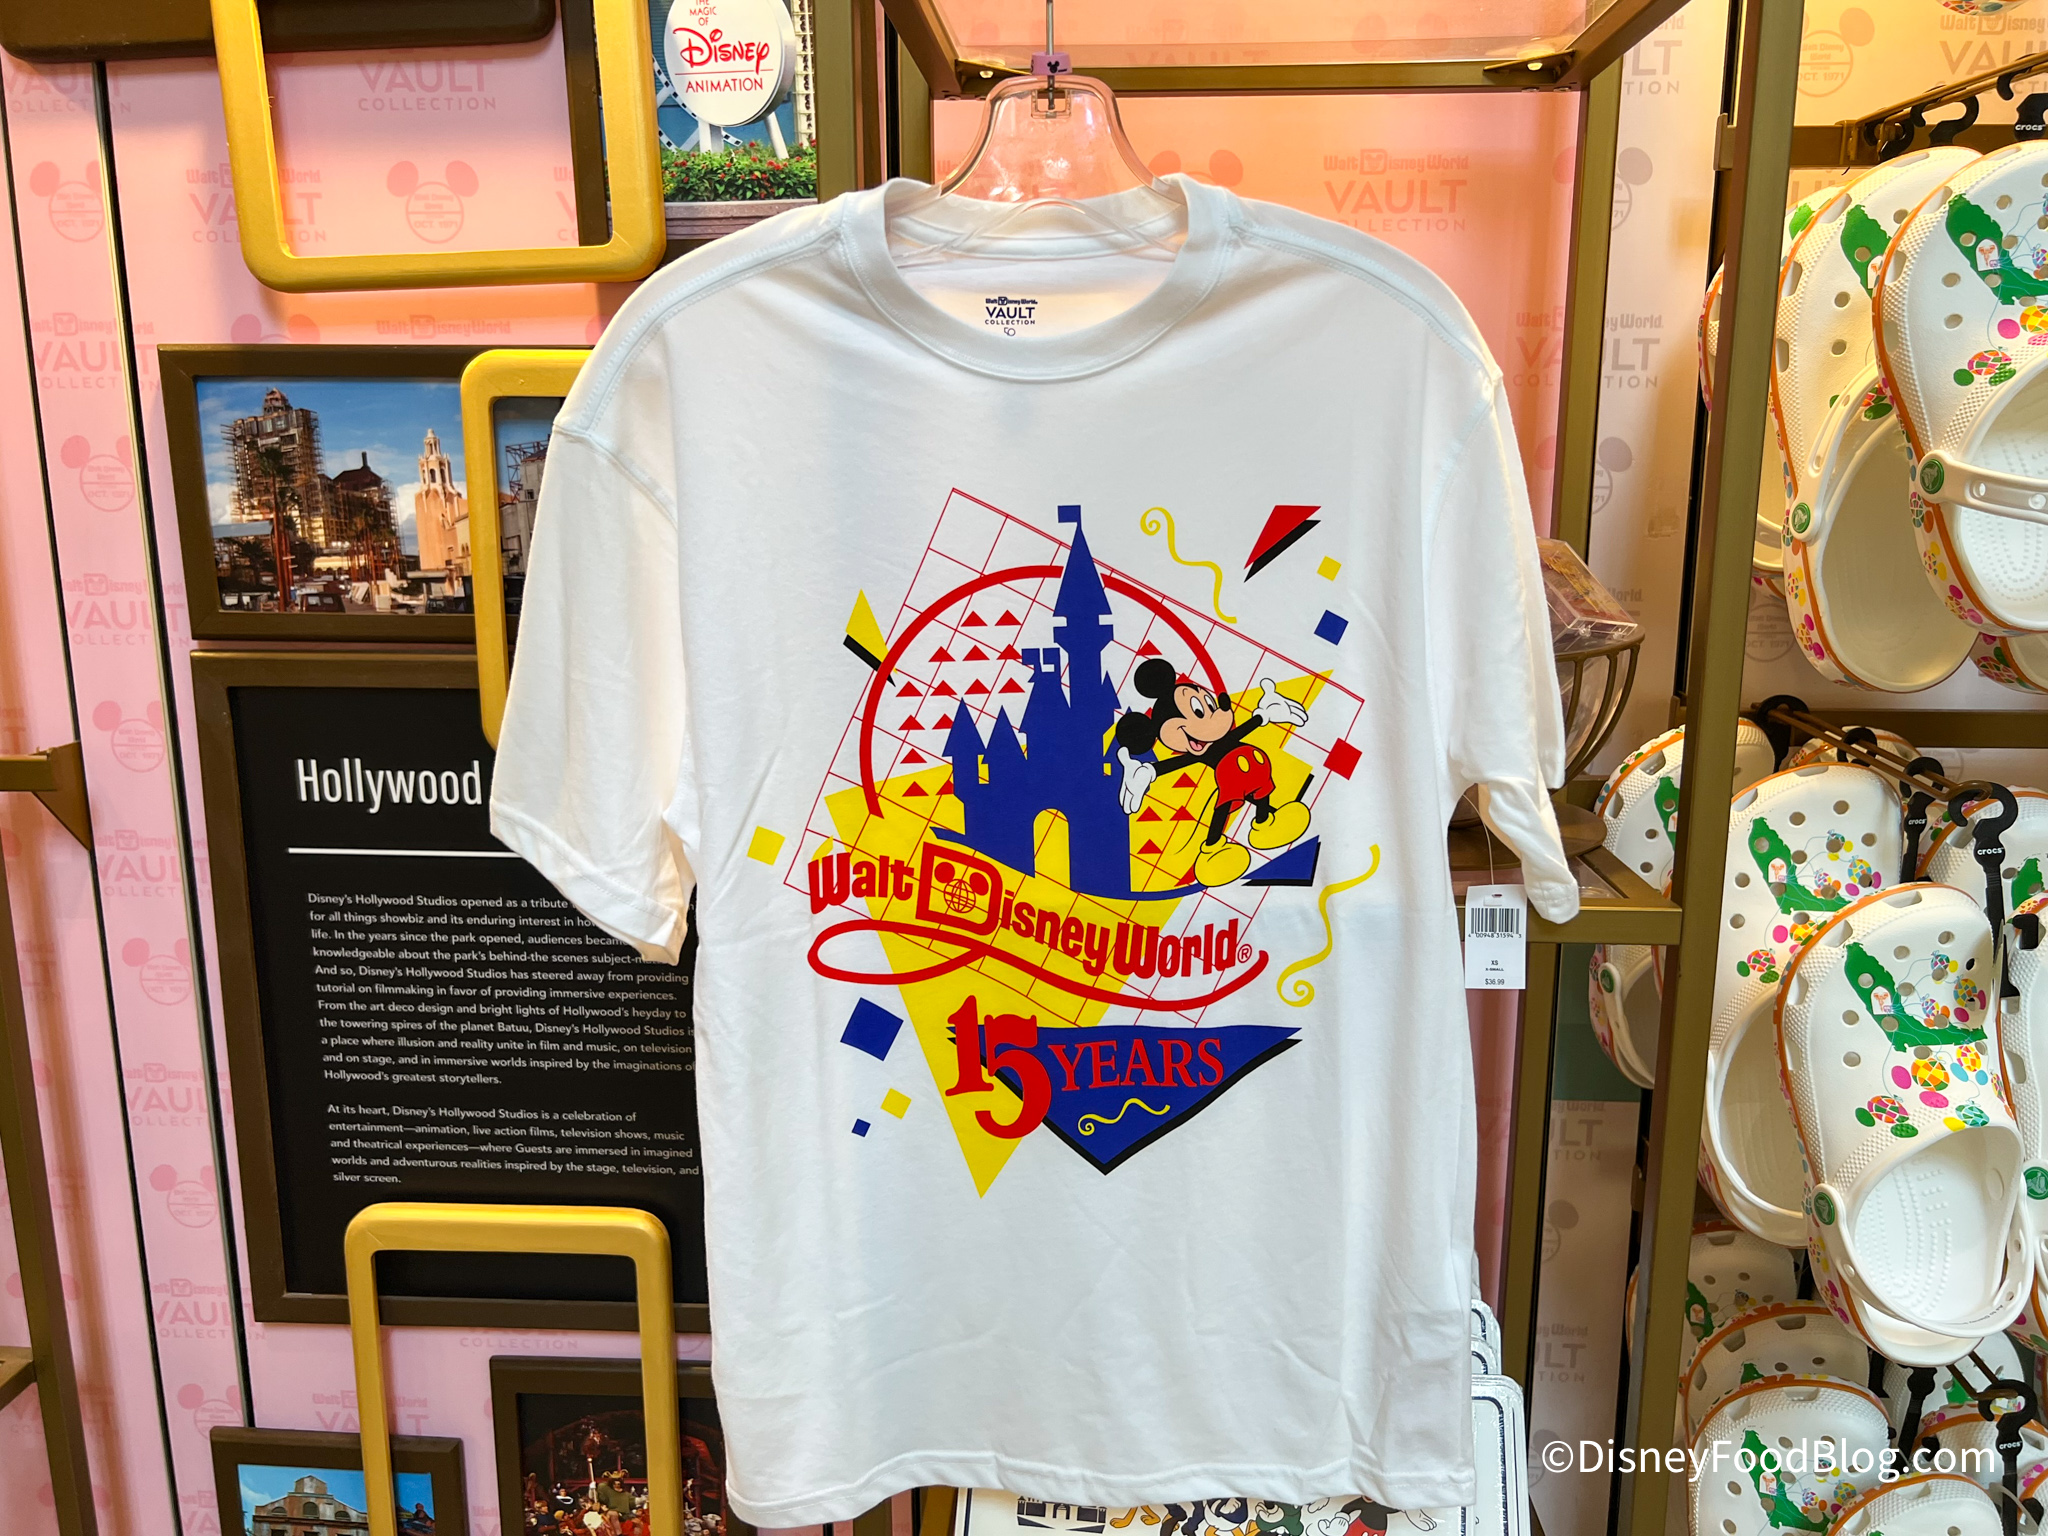 What's New in Disney's Hollywood Studios: Retro 50th Anniversary